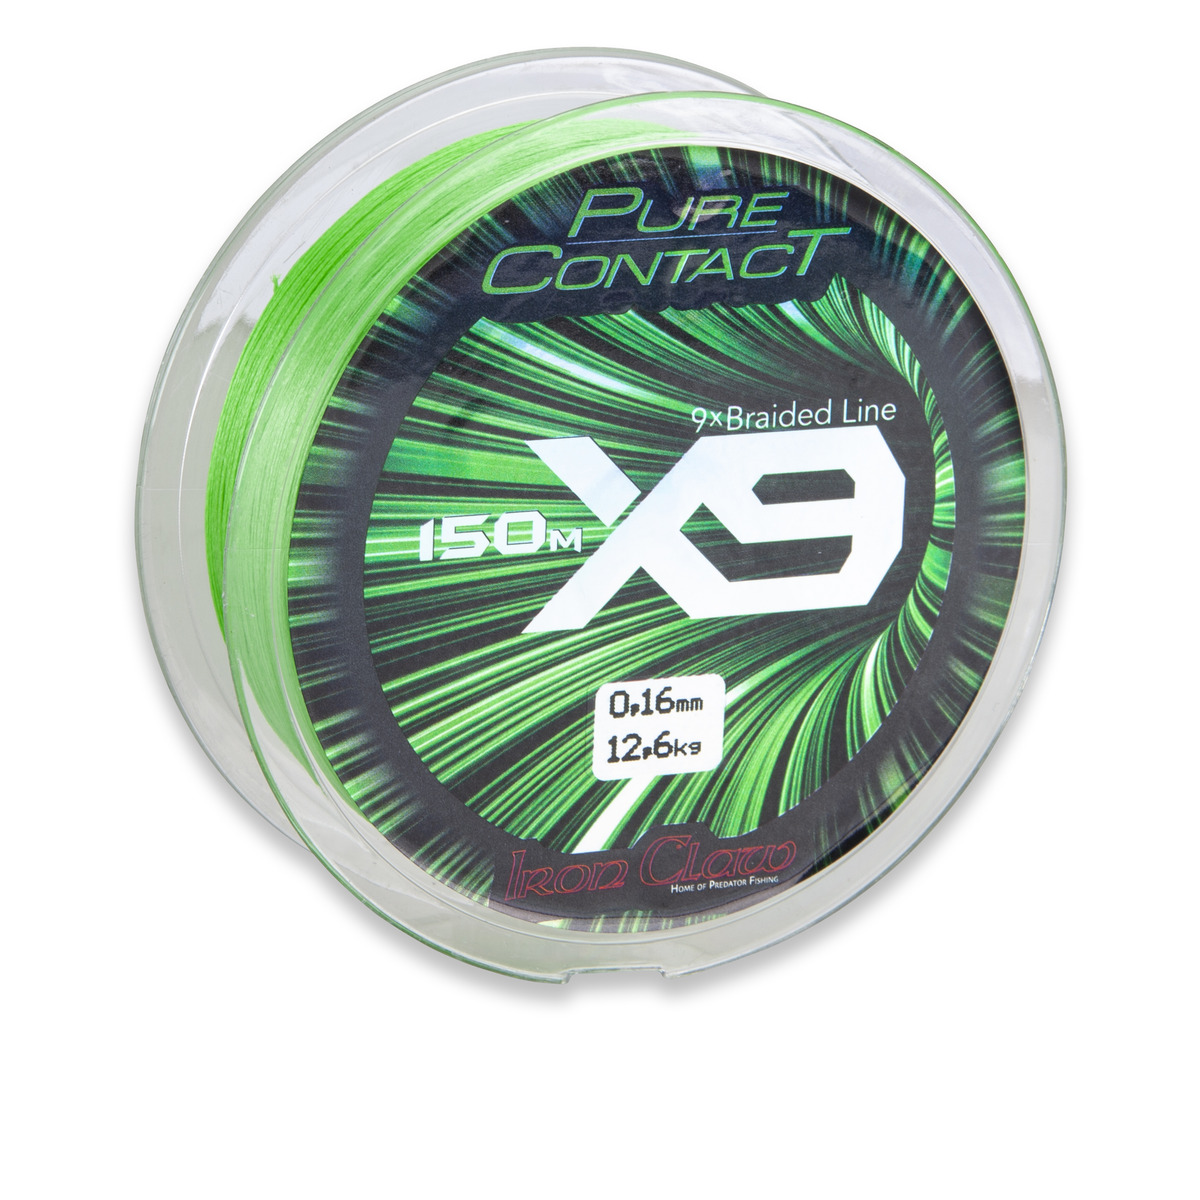 Iron Claw Pure Contact X9 Green - 1500 m 0.21 mm